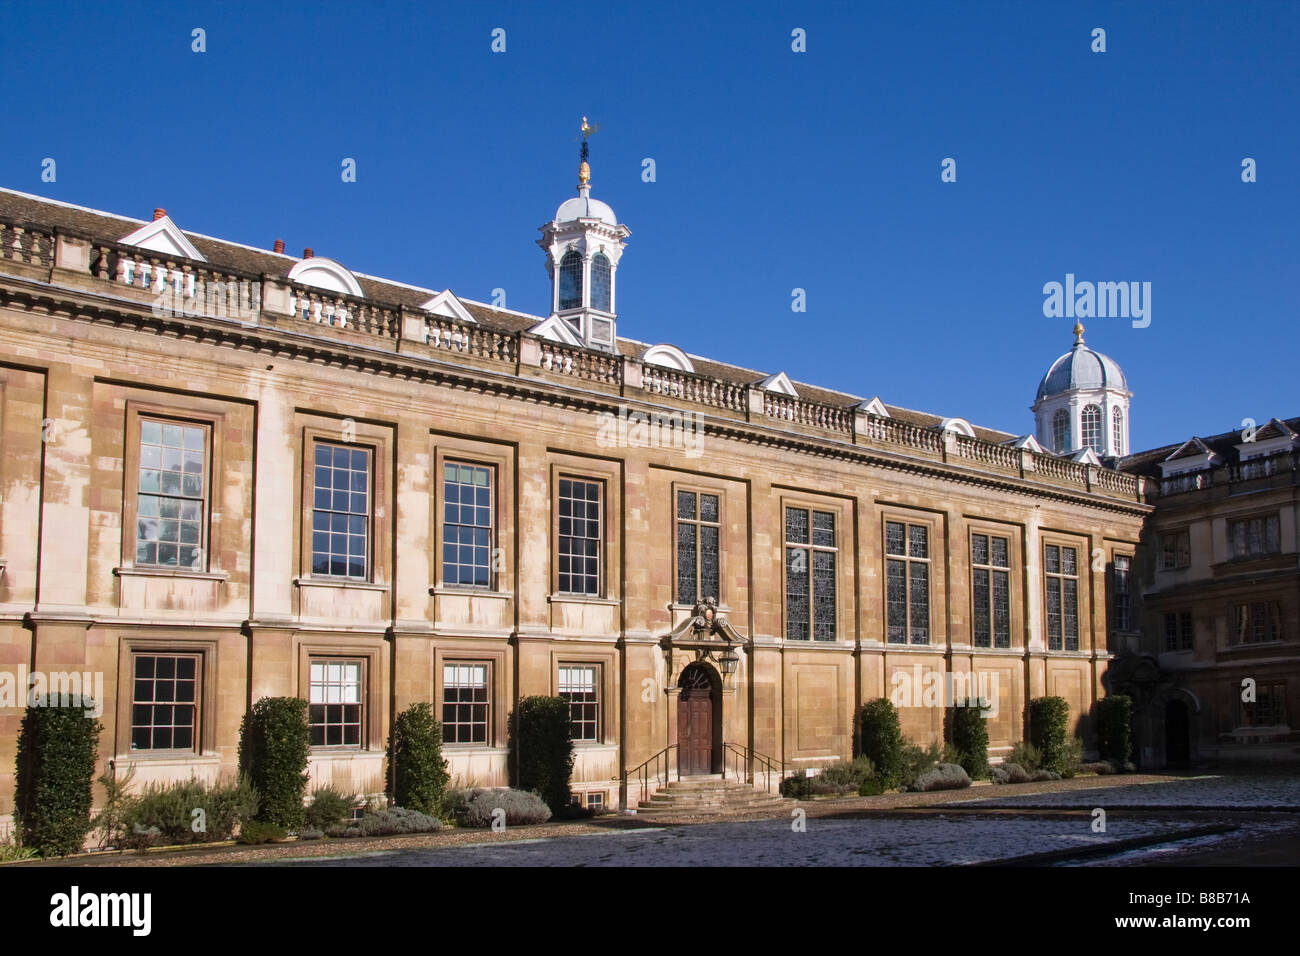 The Courtyard of 'Clare College', Cambridge, England, UK. Stock Photo